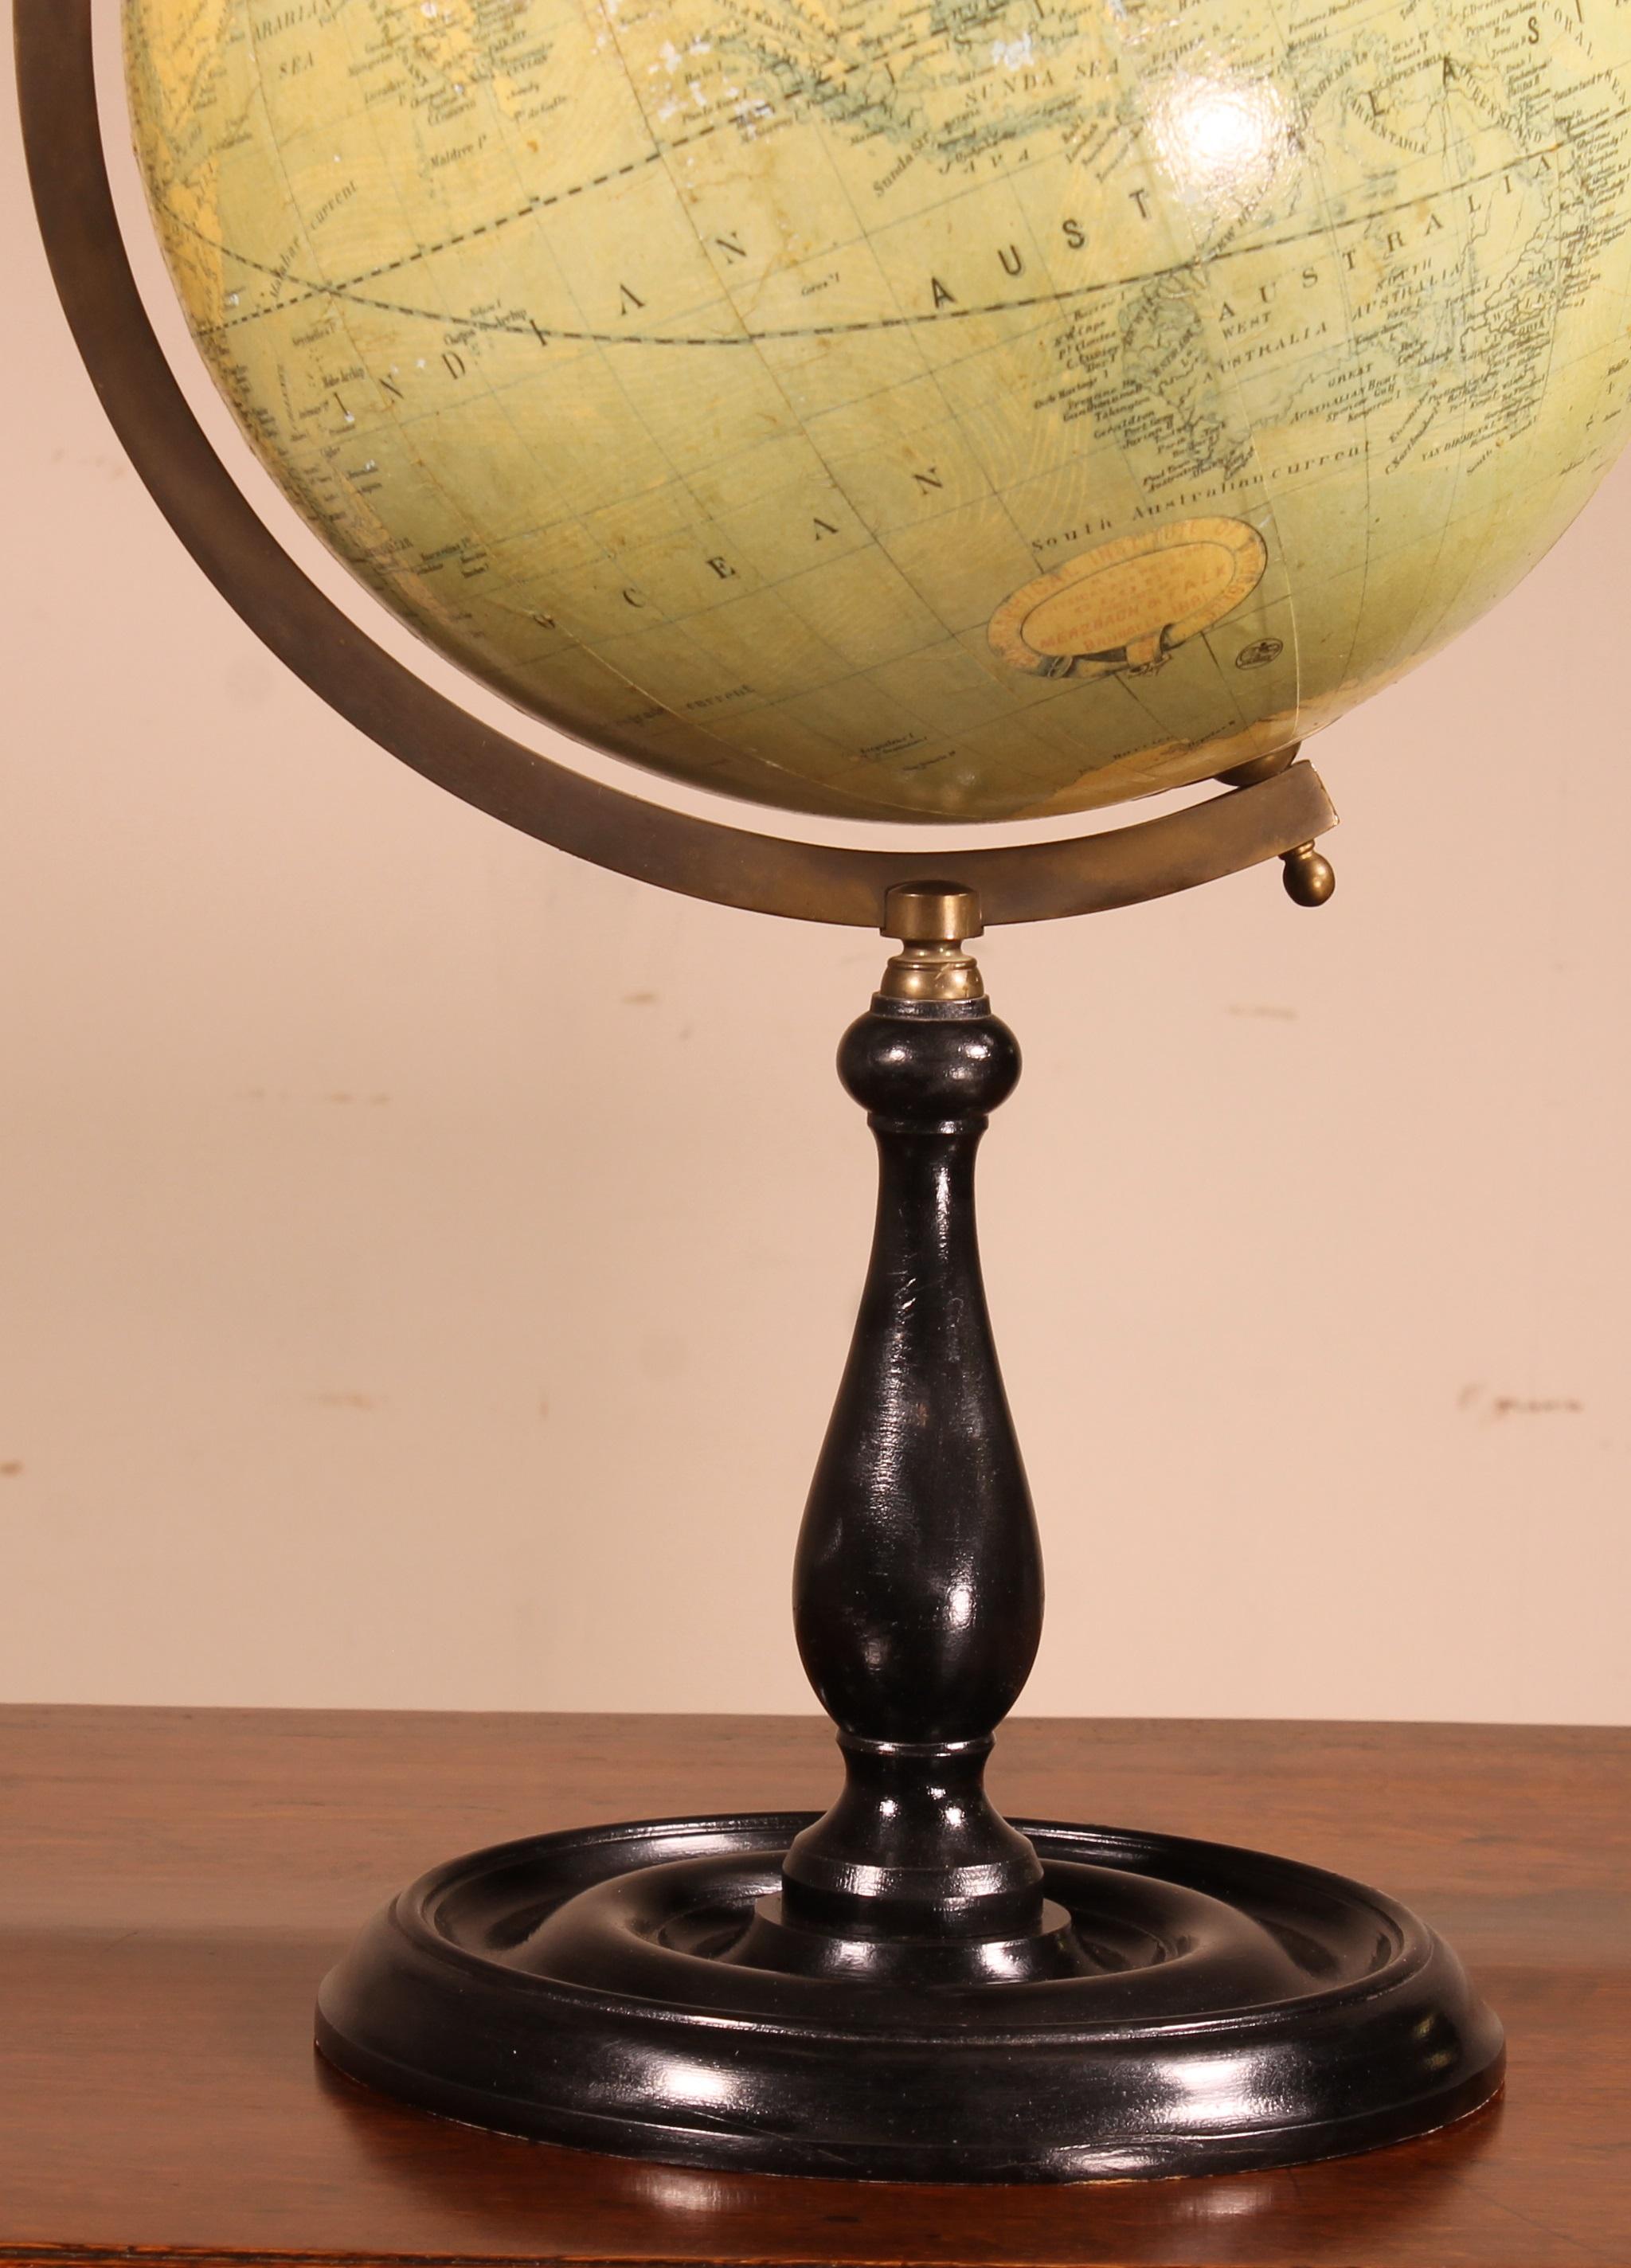 Old Belgian terrestrial globe Merzbach & Falk dated 1881 Brussels.
We also find below the globe a Greaves & Thomas London inscription
Polar mount with brass meridian
The globe is made of cardboard printed on paper.
decorative turned ebonised